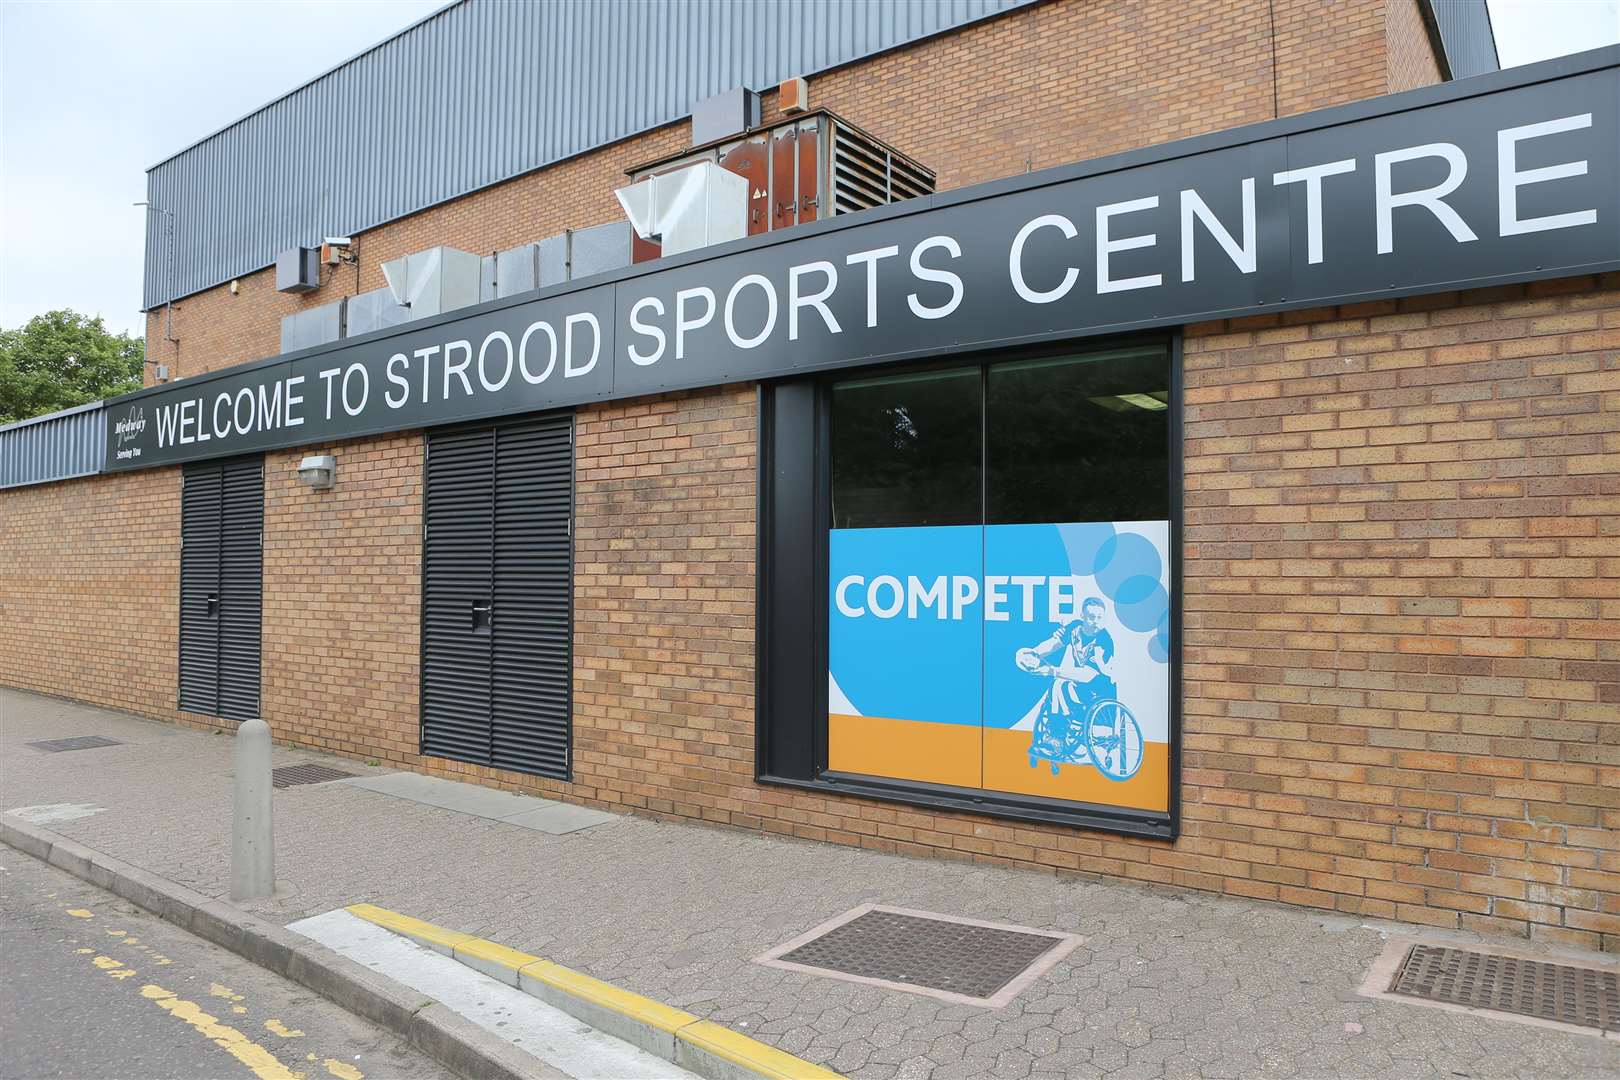 A man sadly died after being taken ill while playing badminton at Strood Sports Centre